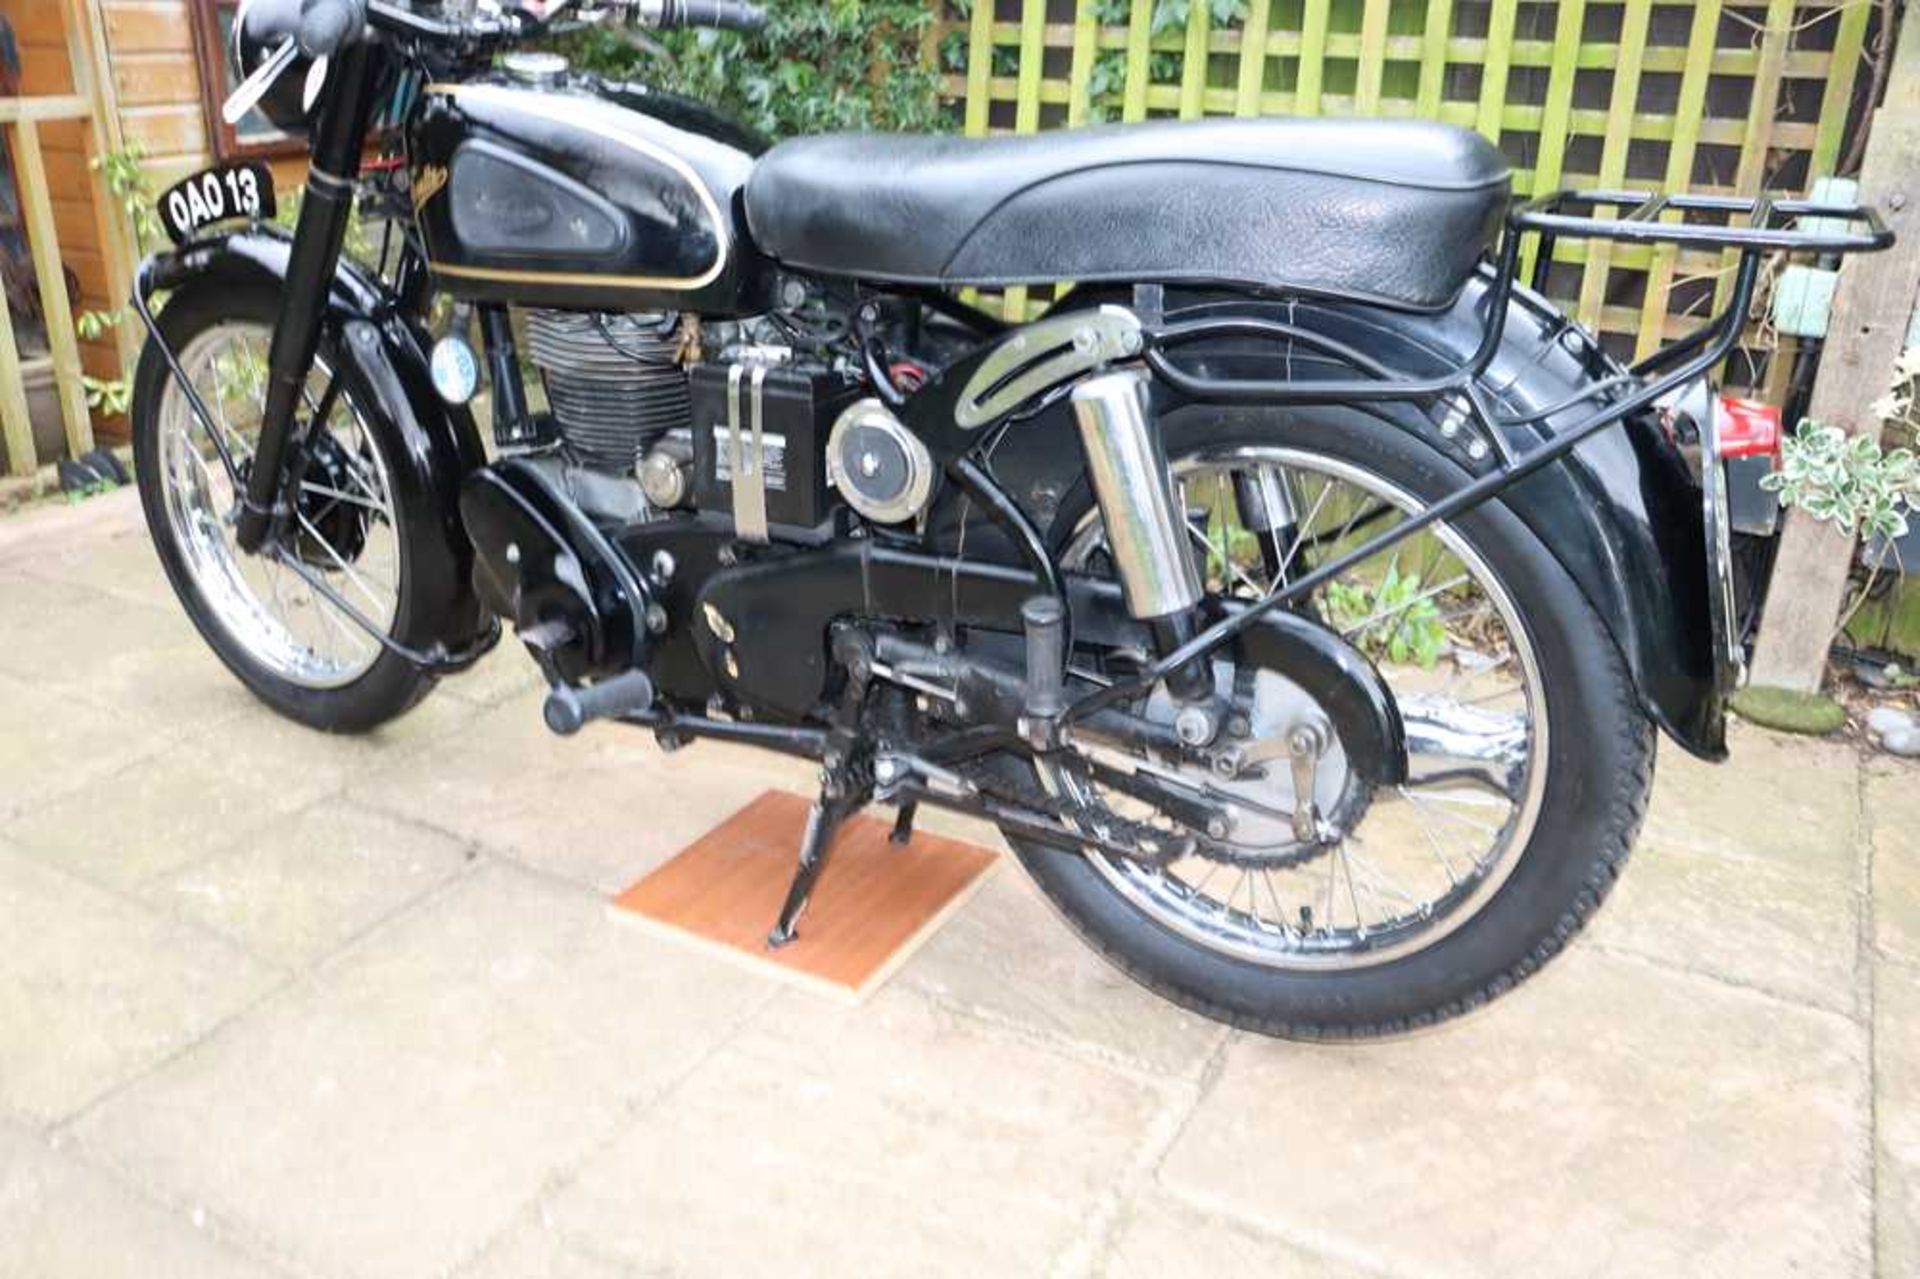 1954 Velocette MSS Fitted with an Alton electric starter kit - Image 4 of 41